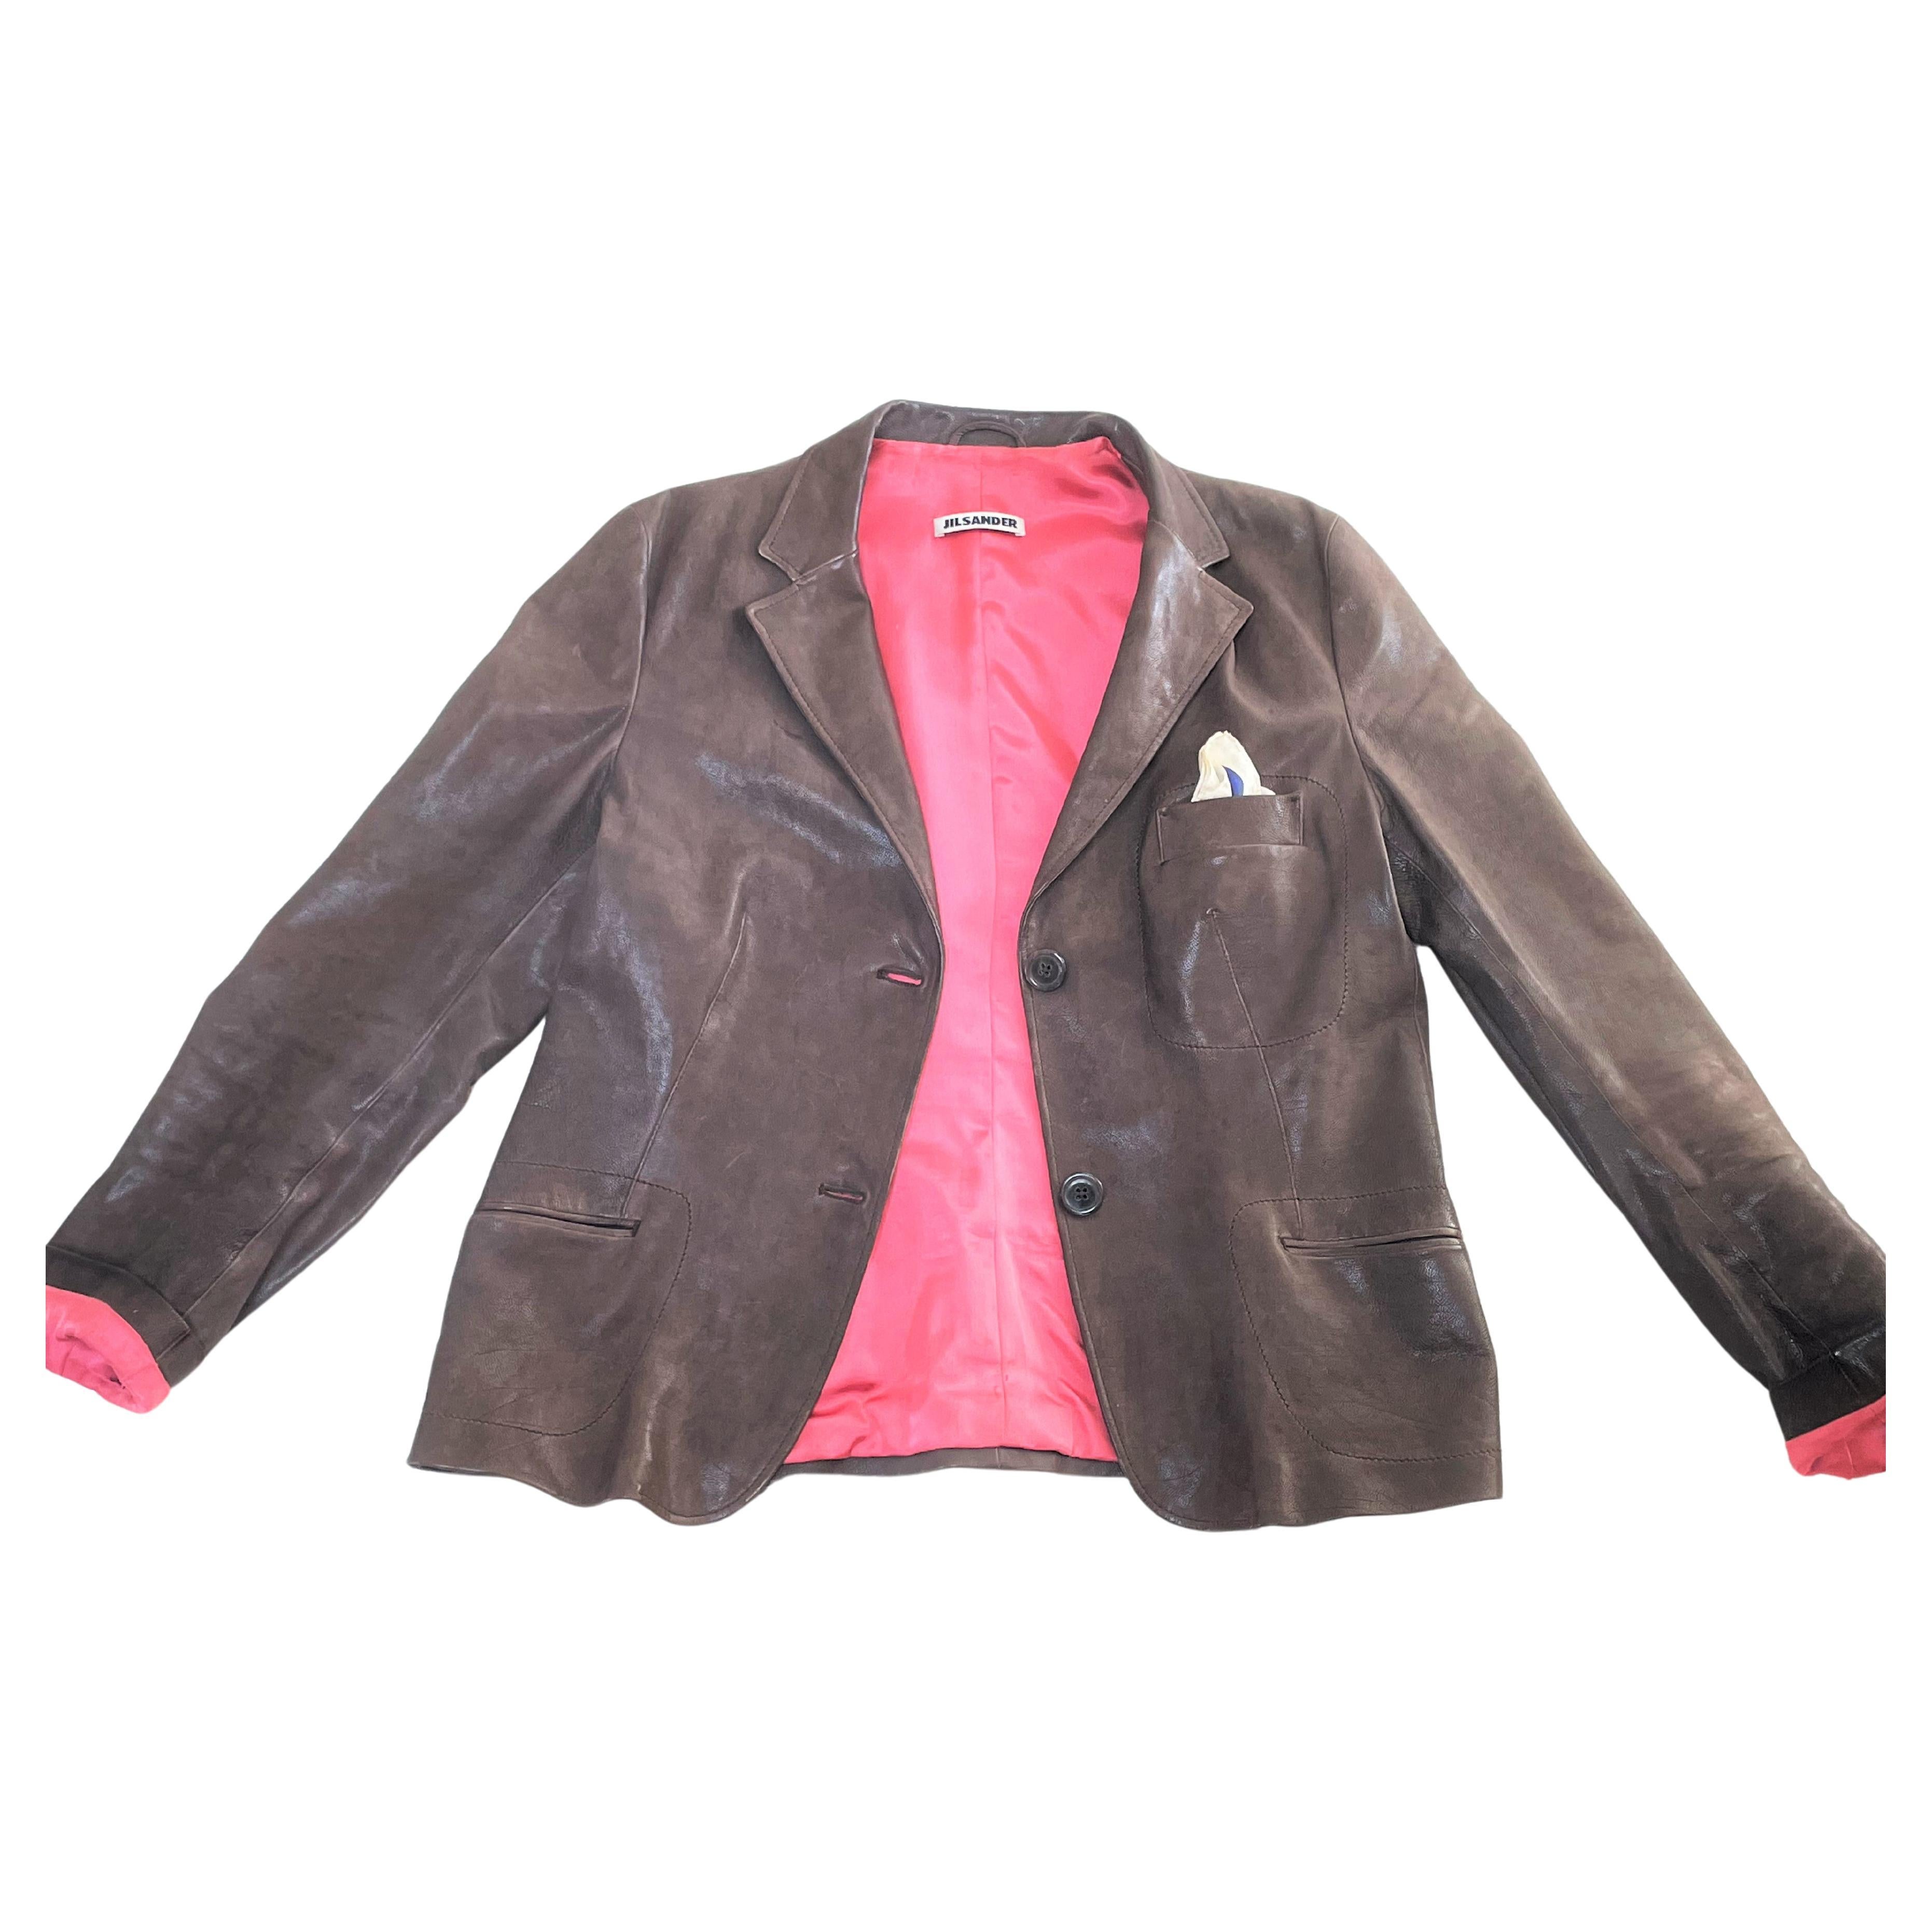 Gray  Smooth Leather Blazer by Jil Sander brown, pink lining size 44 For Sale